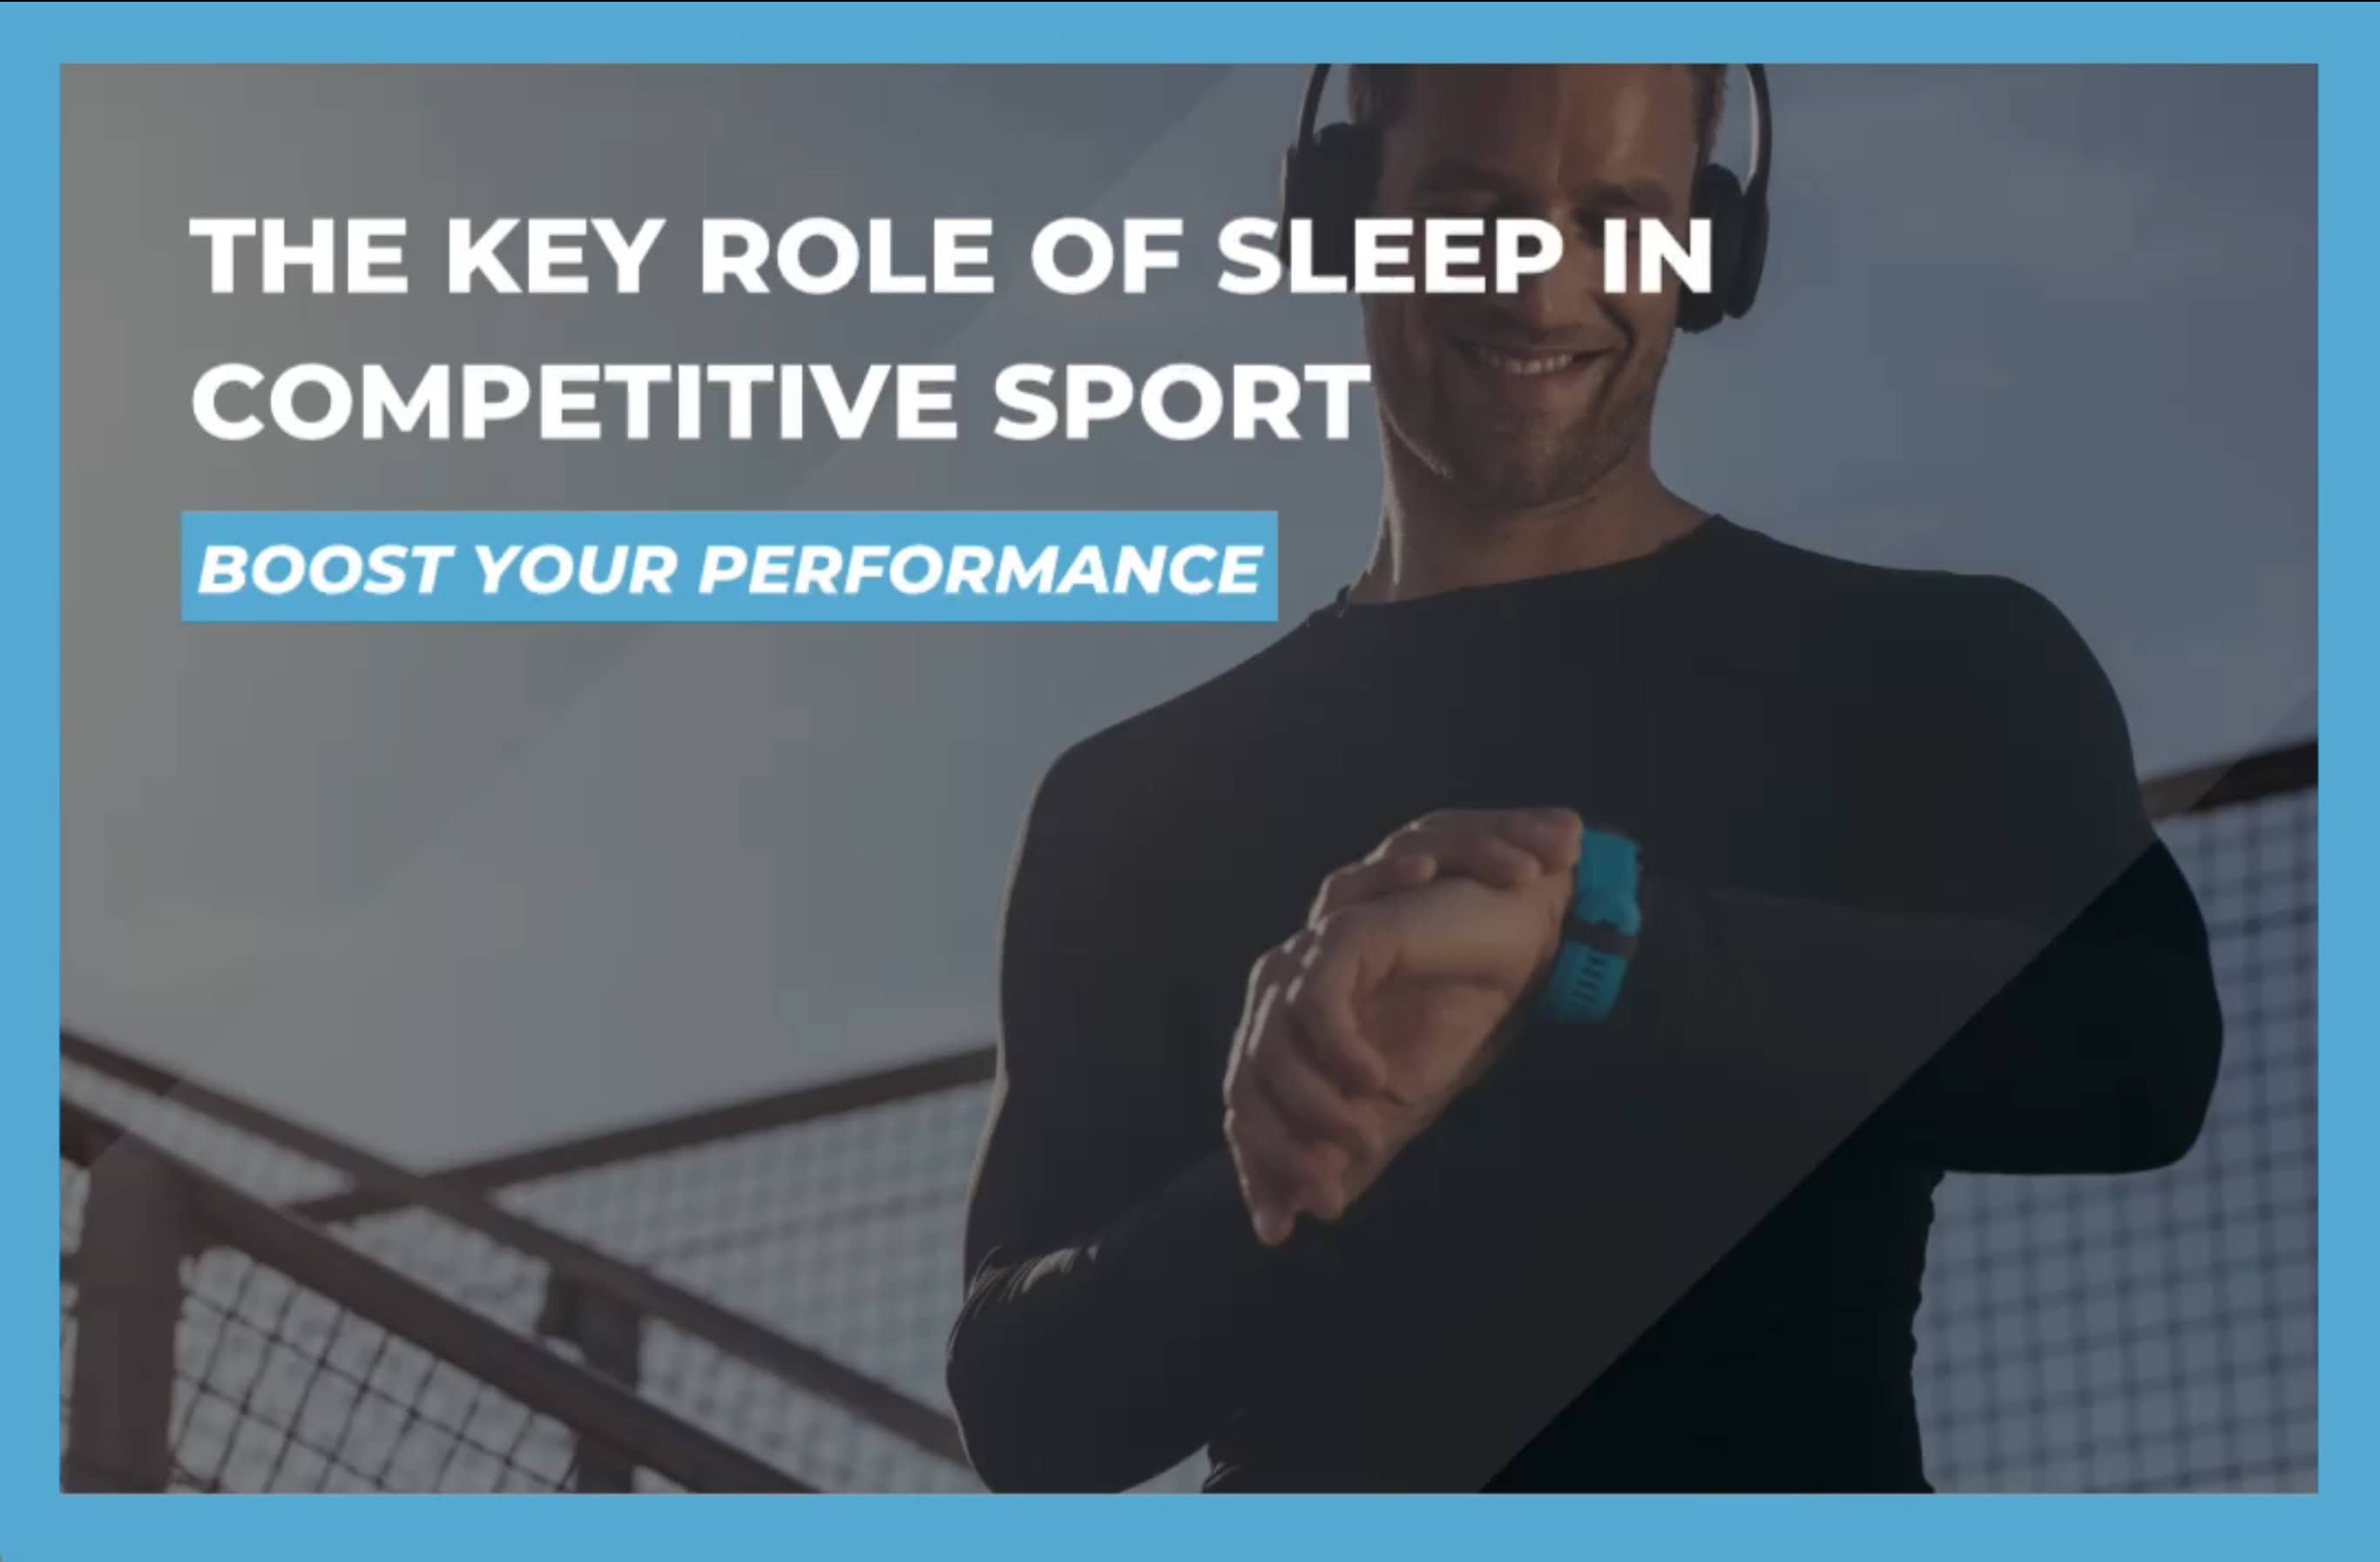 The key role of sleep in competitive sport